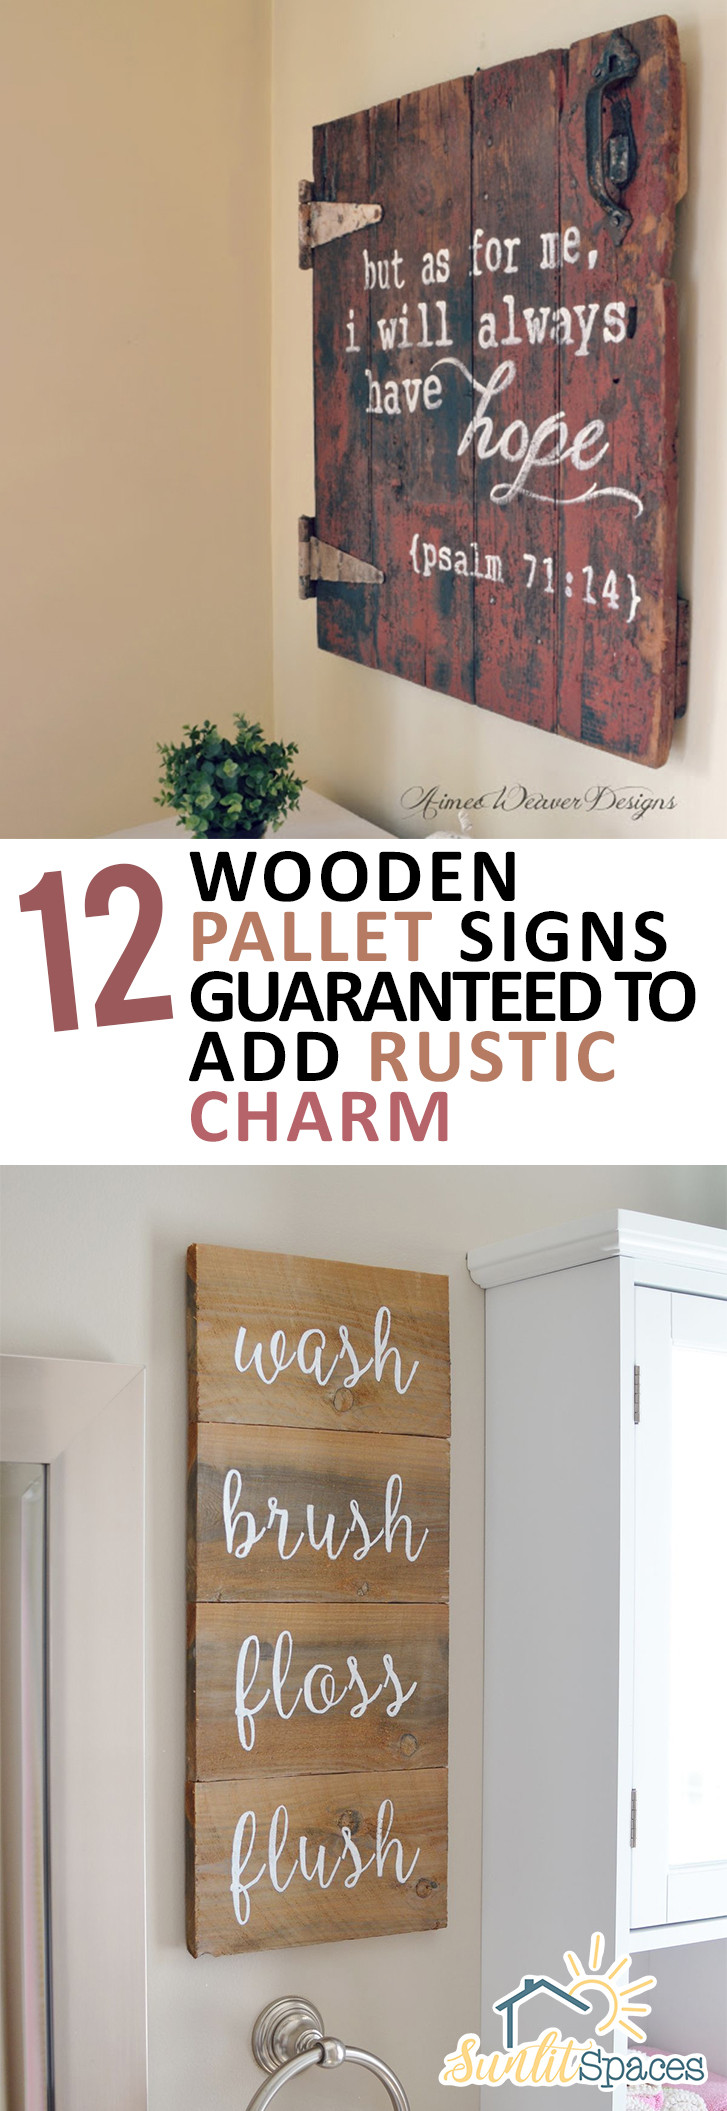 DIY Rustic Wood Signs
 12 Wooden Pallet Signs Guaranteed to Add Rustic Charm